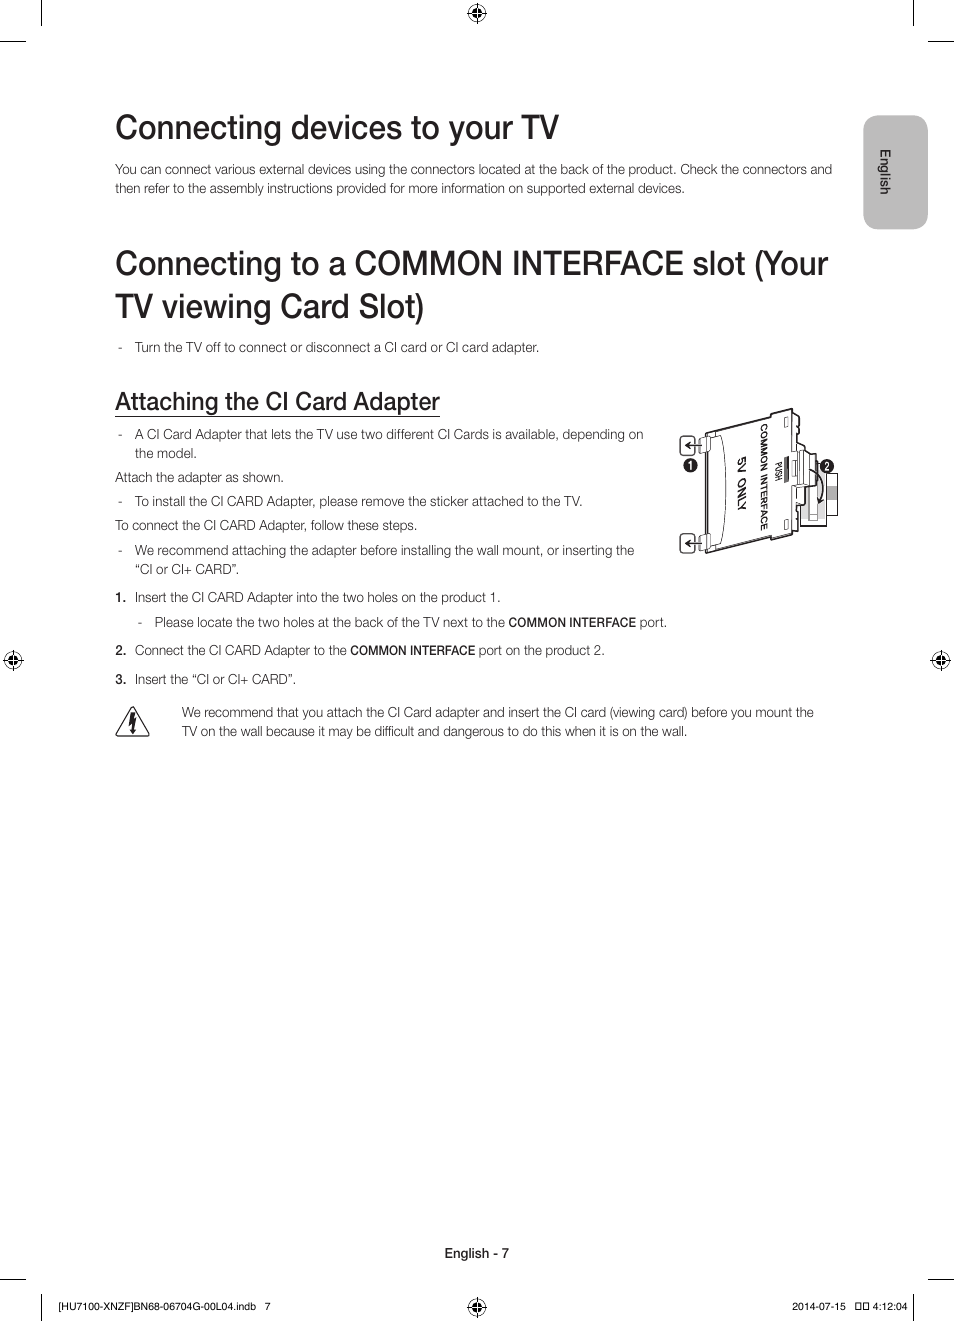 Connecting devices to your tv, Attaching the ci card adapter | Samsung  UE55HU7100S User Manual | Page 7 / 82